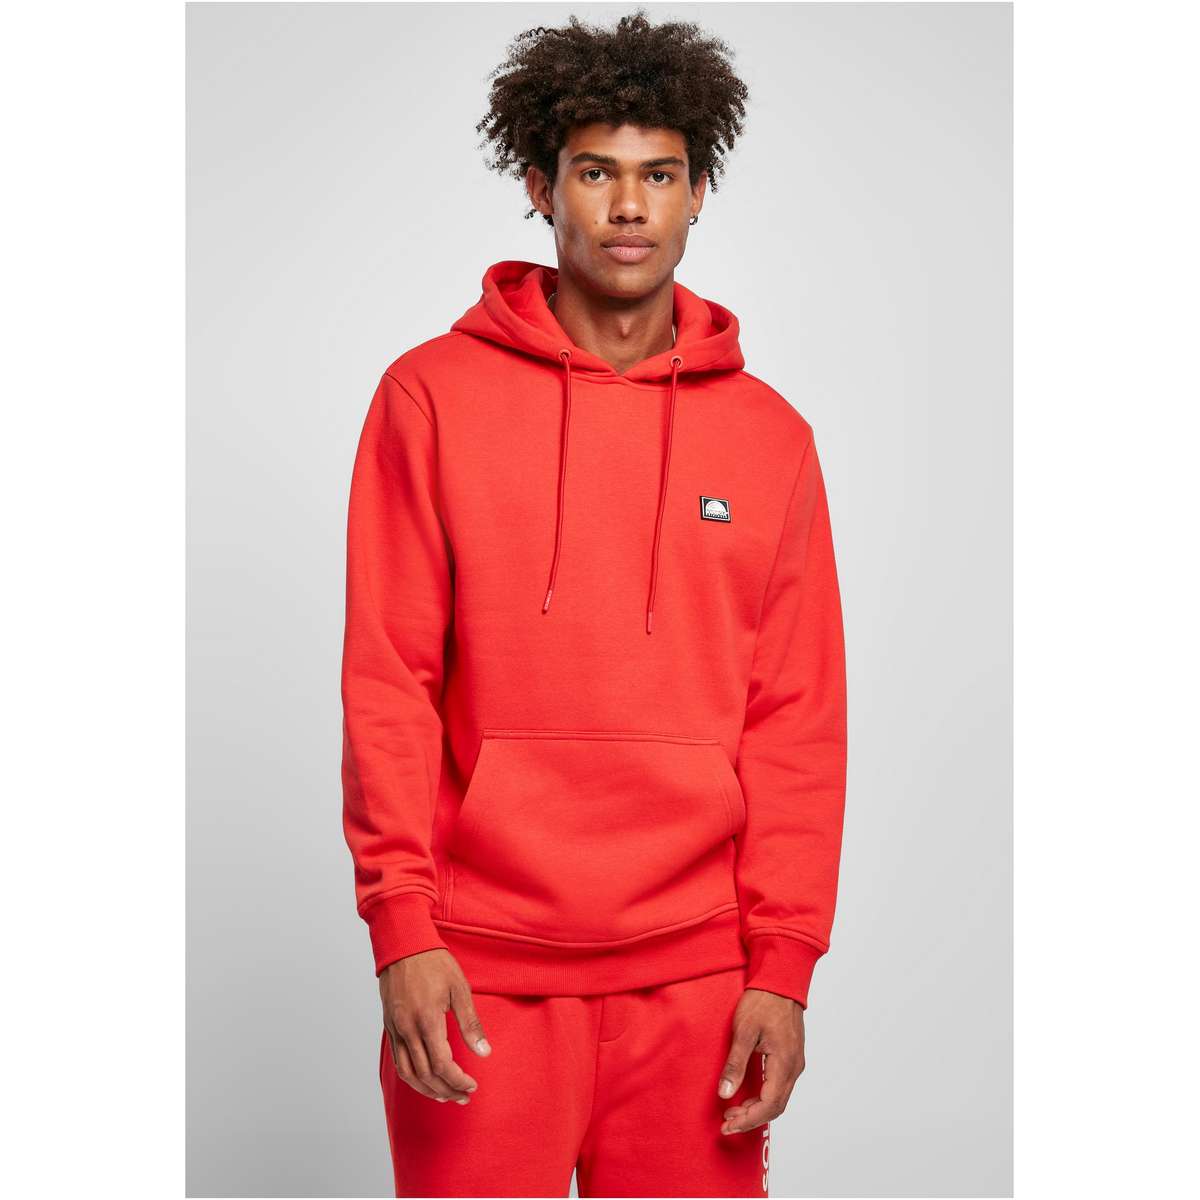 SOUTHPOLE SQUARE LOGO HOODY SP191 SOUTHPOLERED